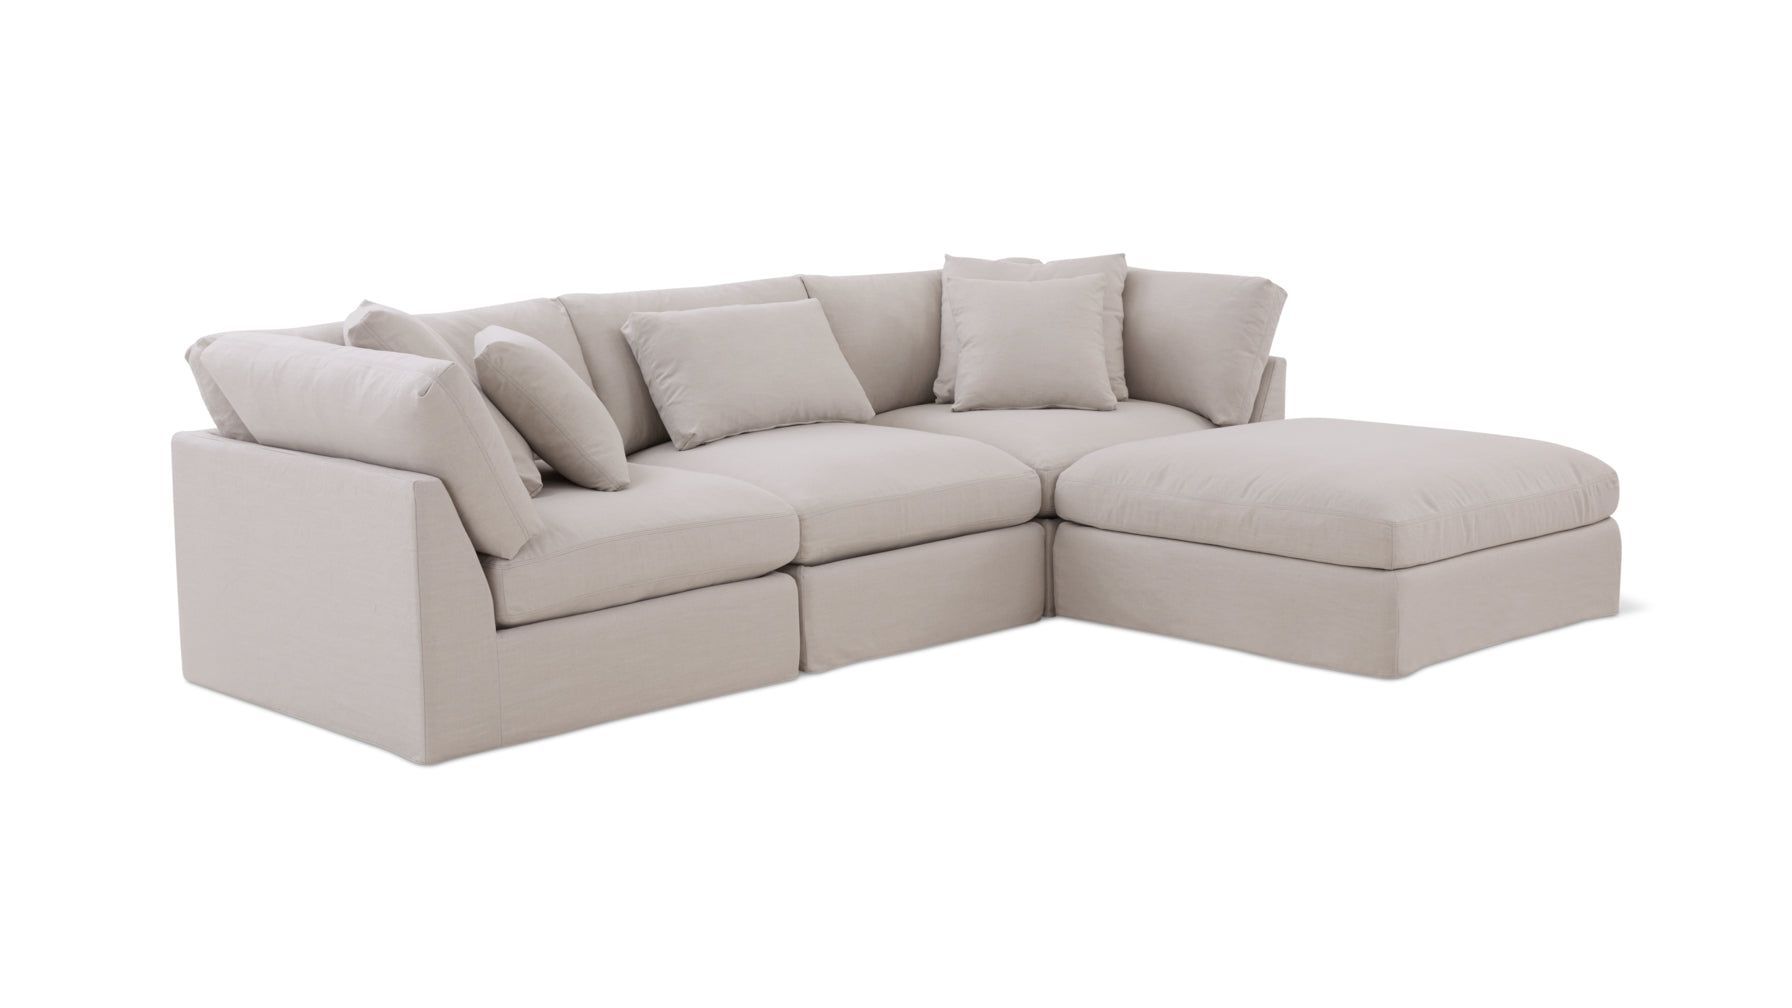 Get Together™ 4-Piece Modular Sectional, Large, Clay - Image 4